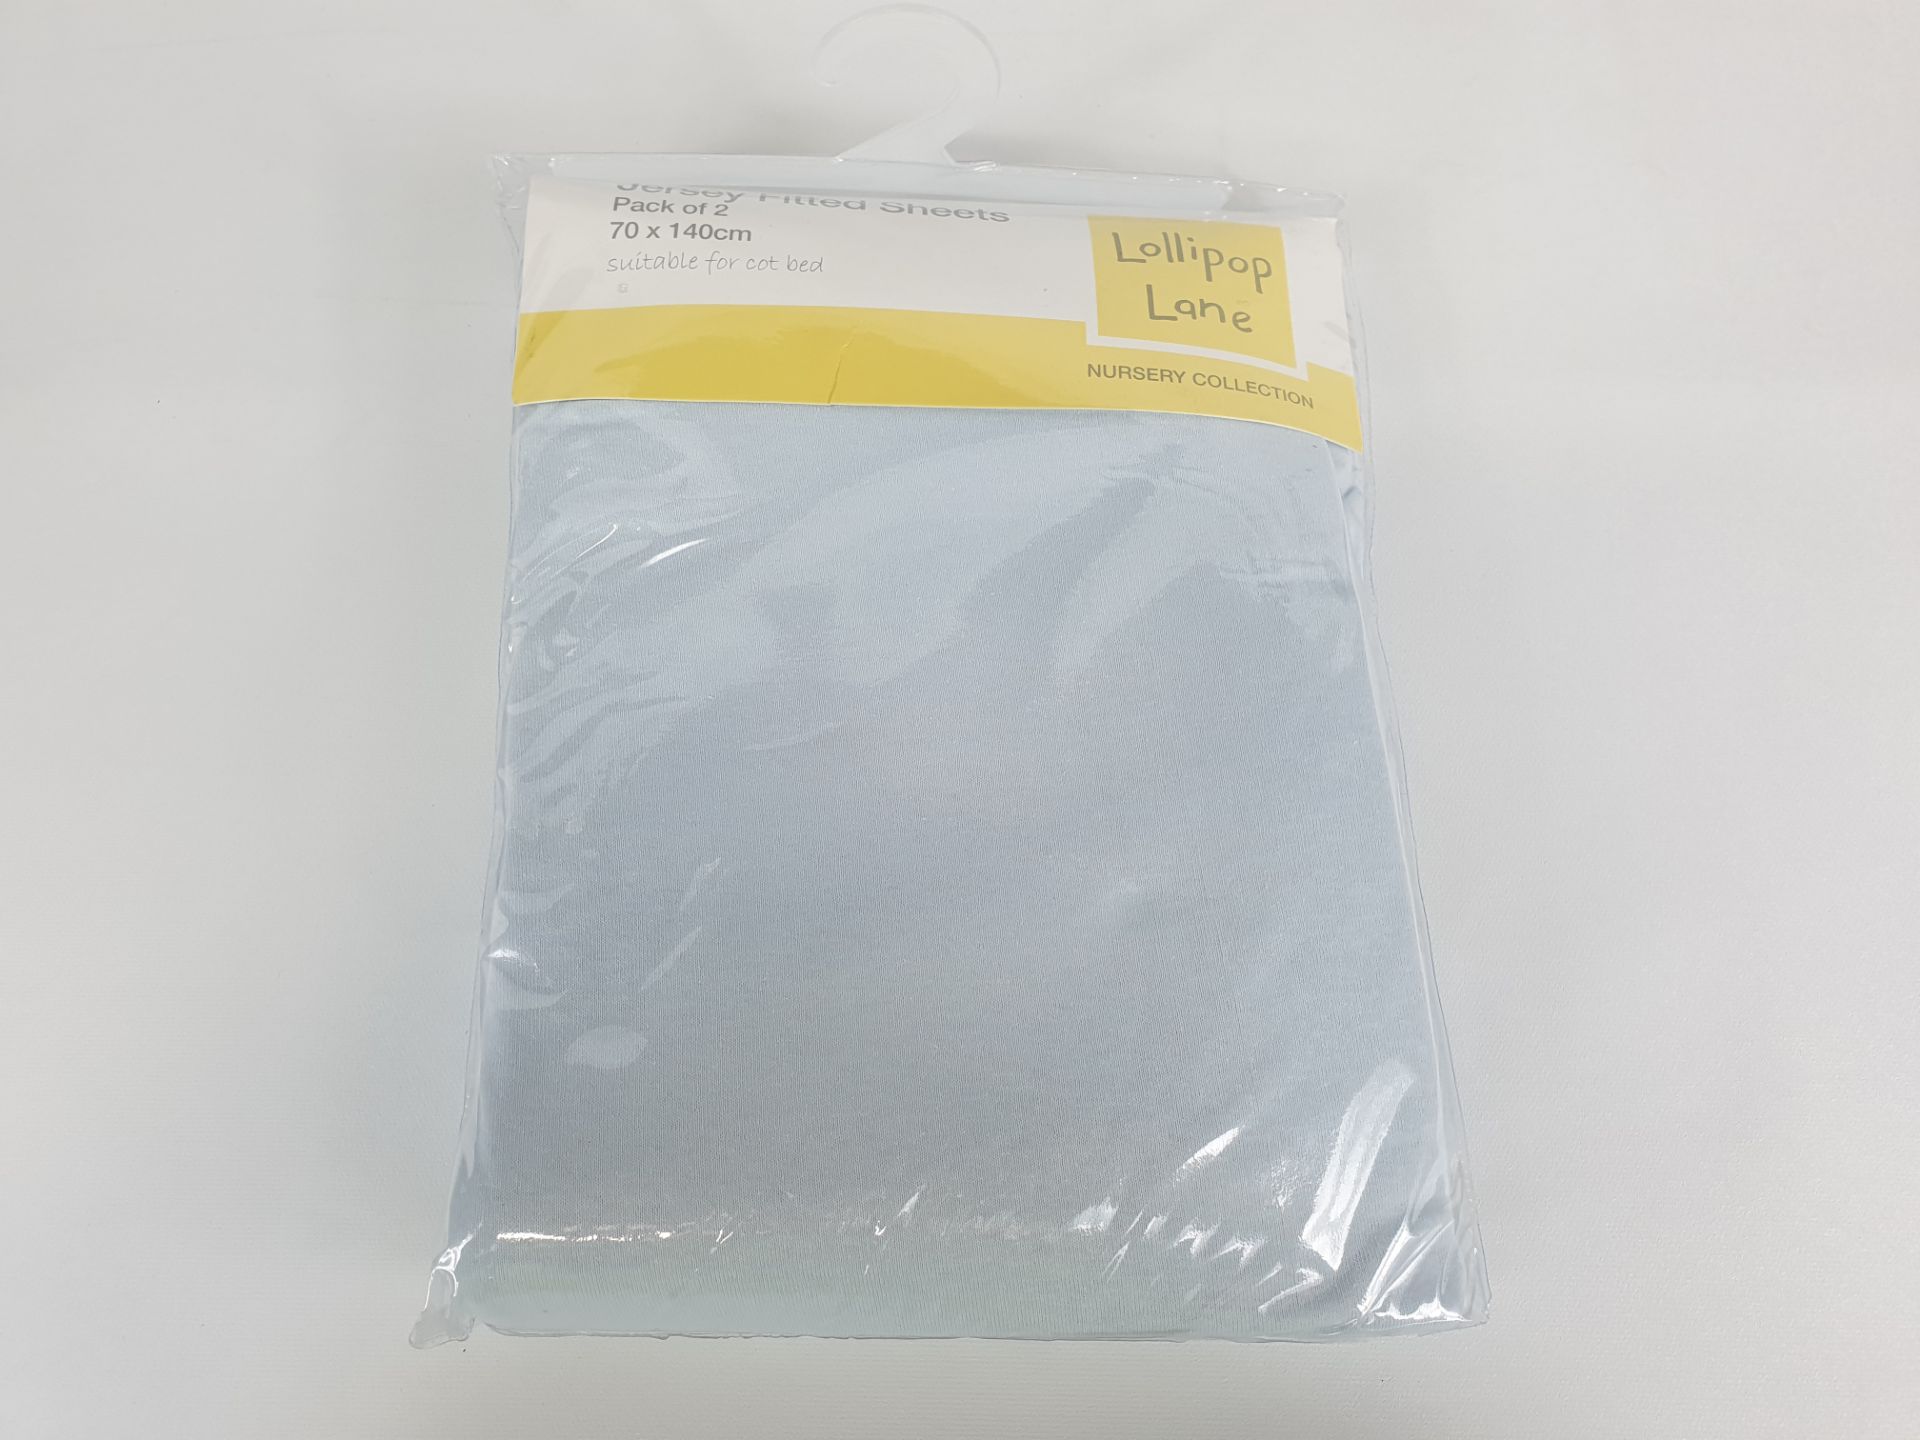 30 X PACKS OF 2 BLUE LOLLIPOP LANE JERSEY FITTED SHEETS SIZE 70 X 140 CM